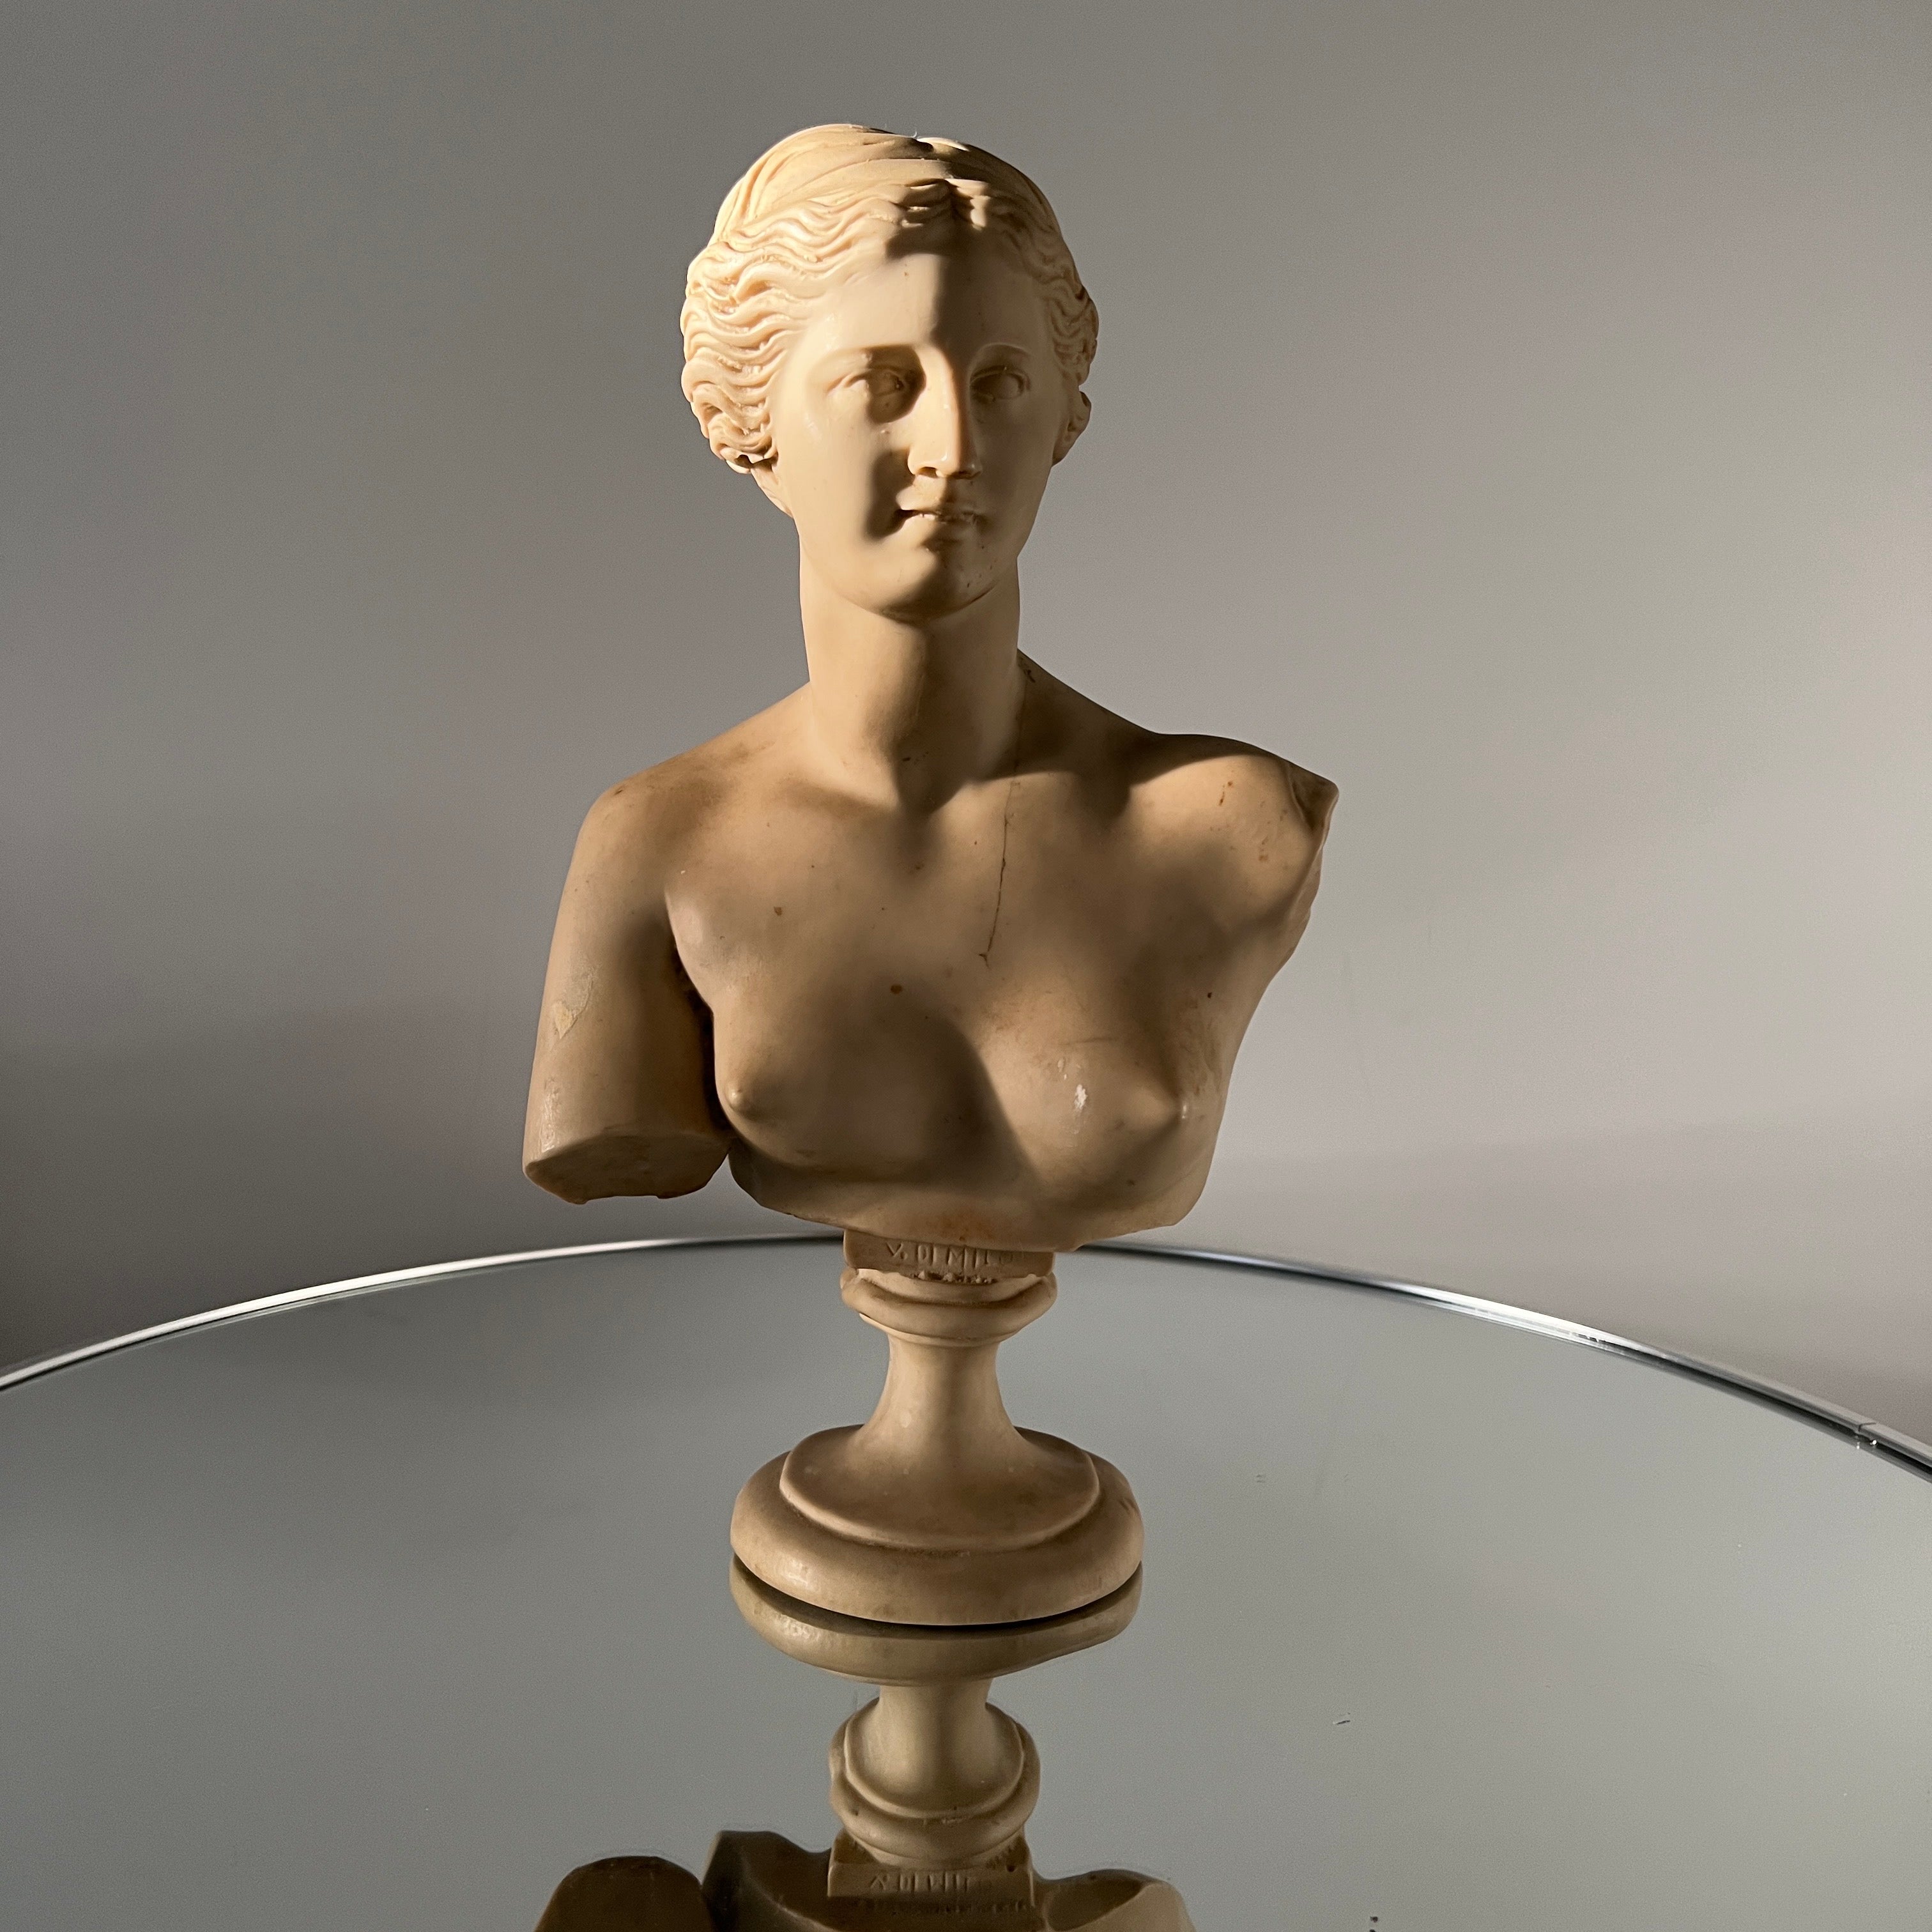 Mid-20th Century bust of Venus de Milo or Aphrodite, the goddess of love.  The sculpture sits on a pedestal base and features exquisite hand-carved details.  This replica is based on the ancient Greek sculpture created during the Hellenistic period